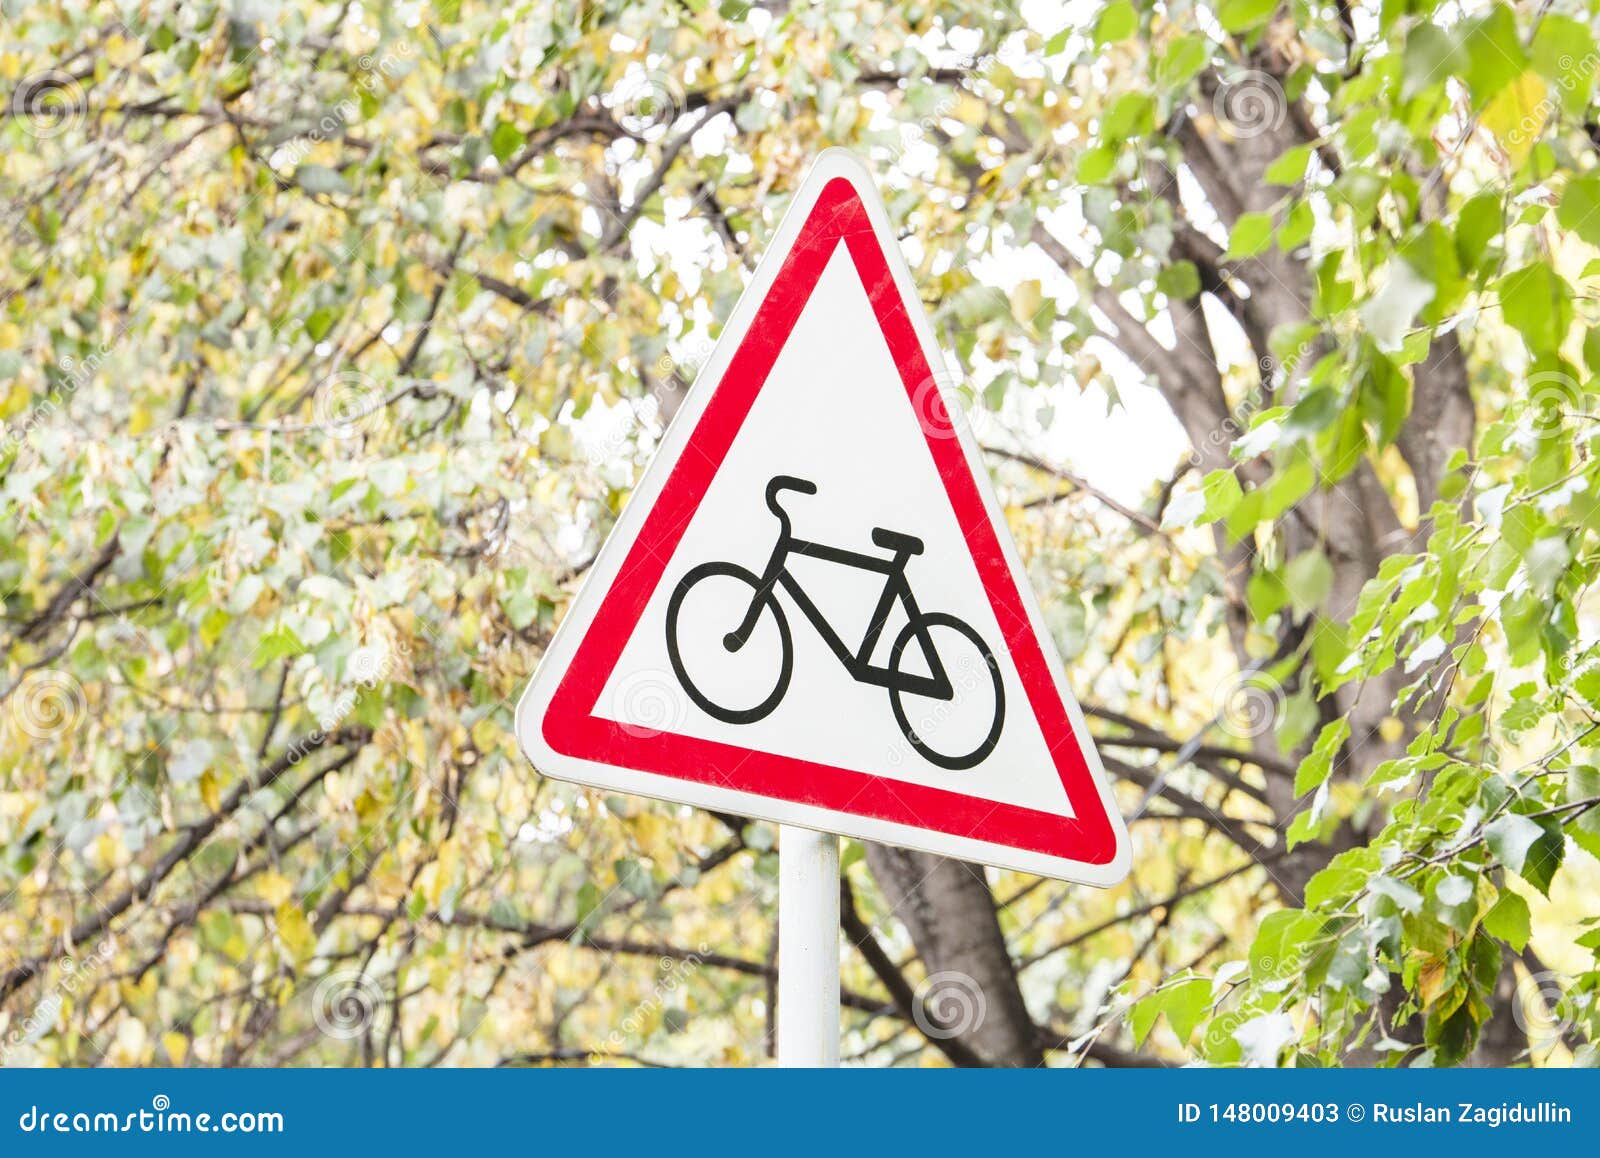 road sign which shows the bike. the sign stands